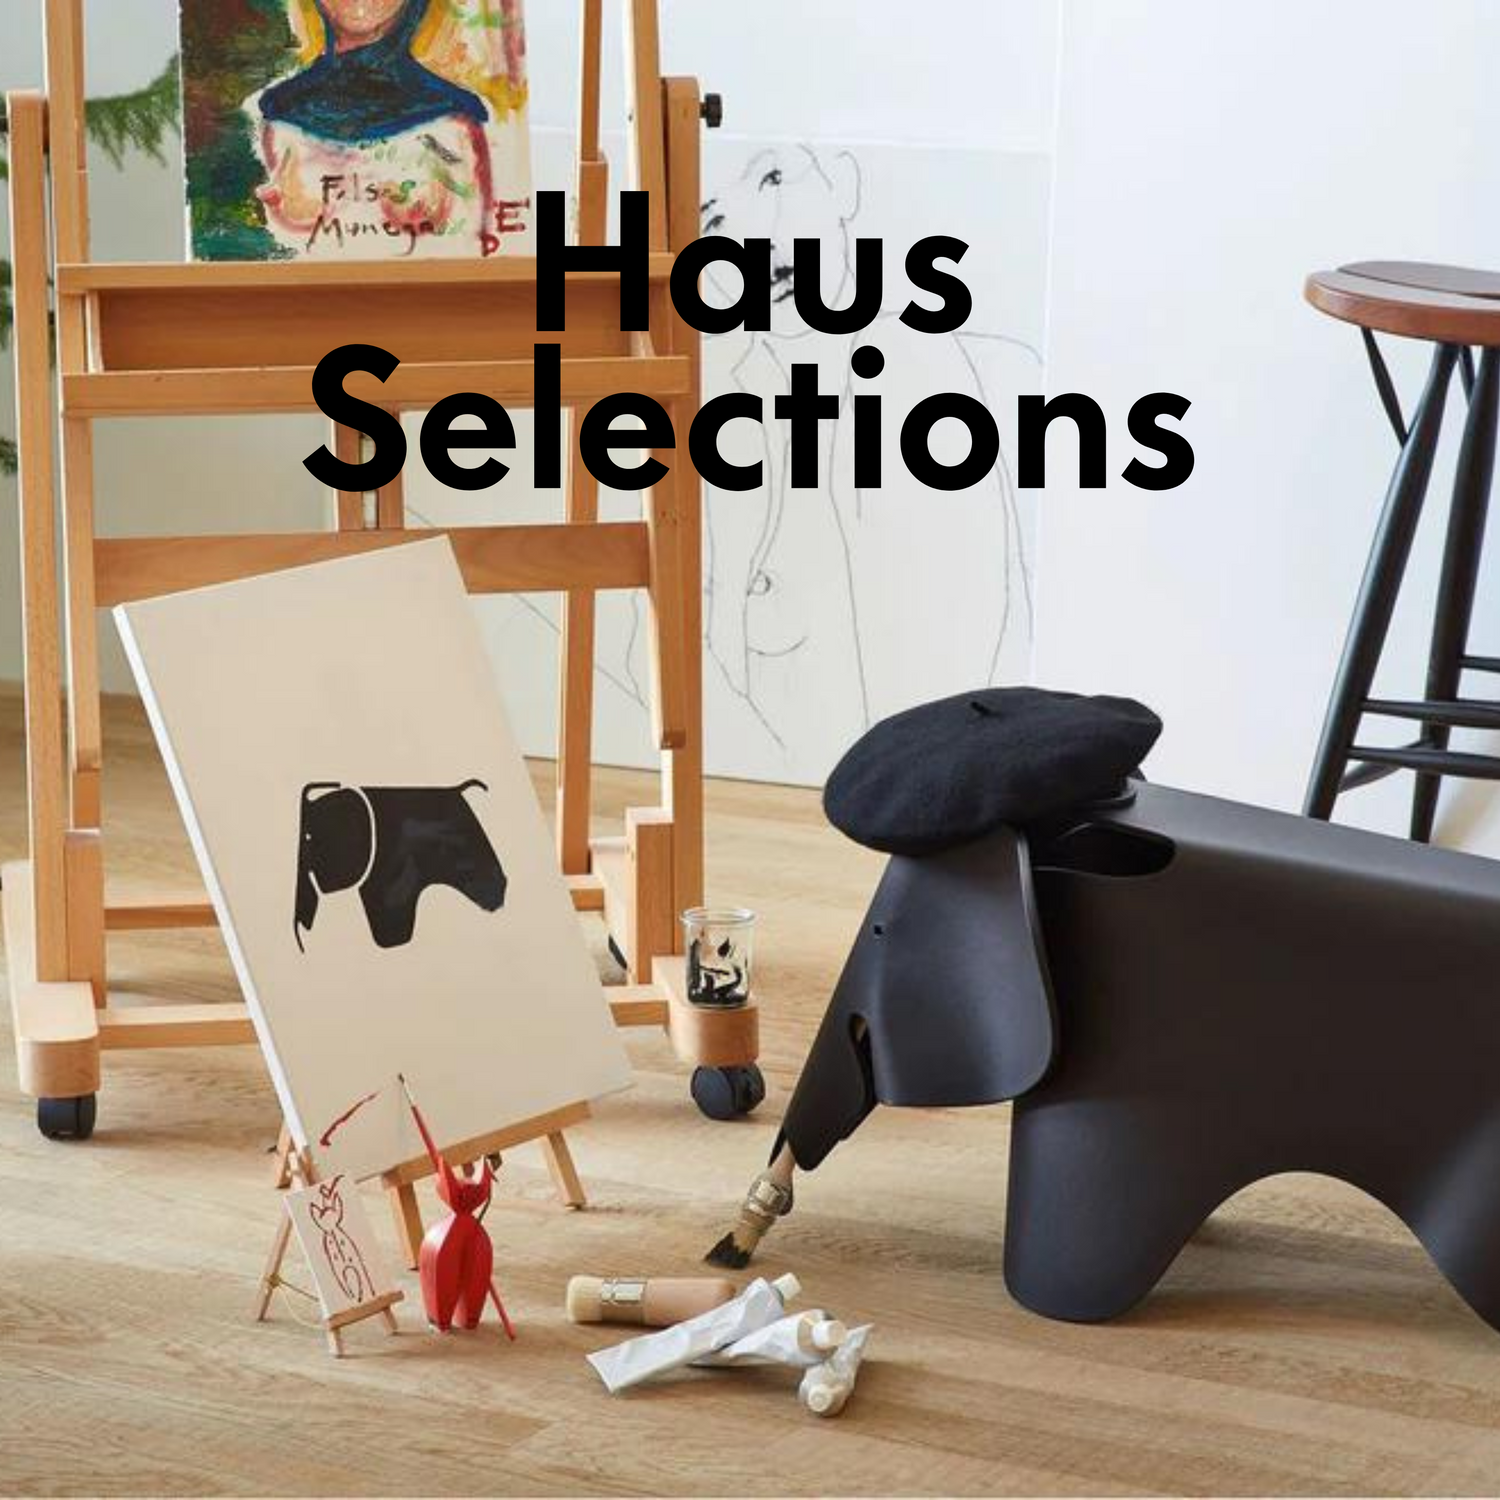 HAUS Selections